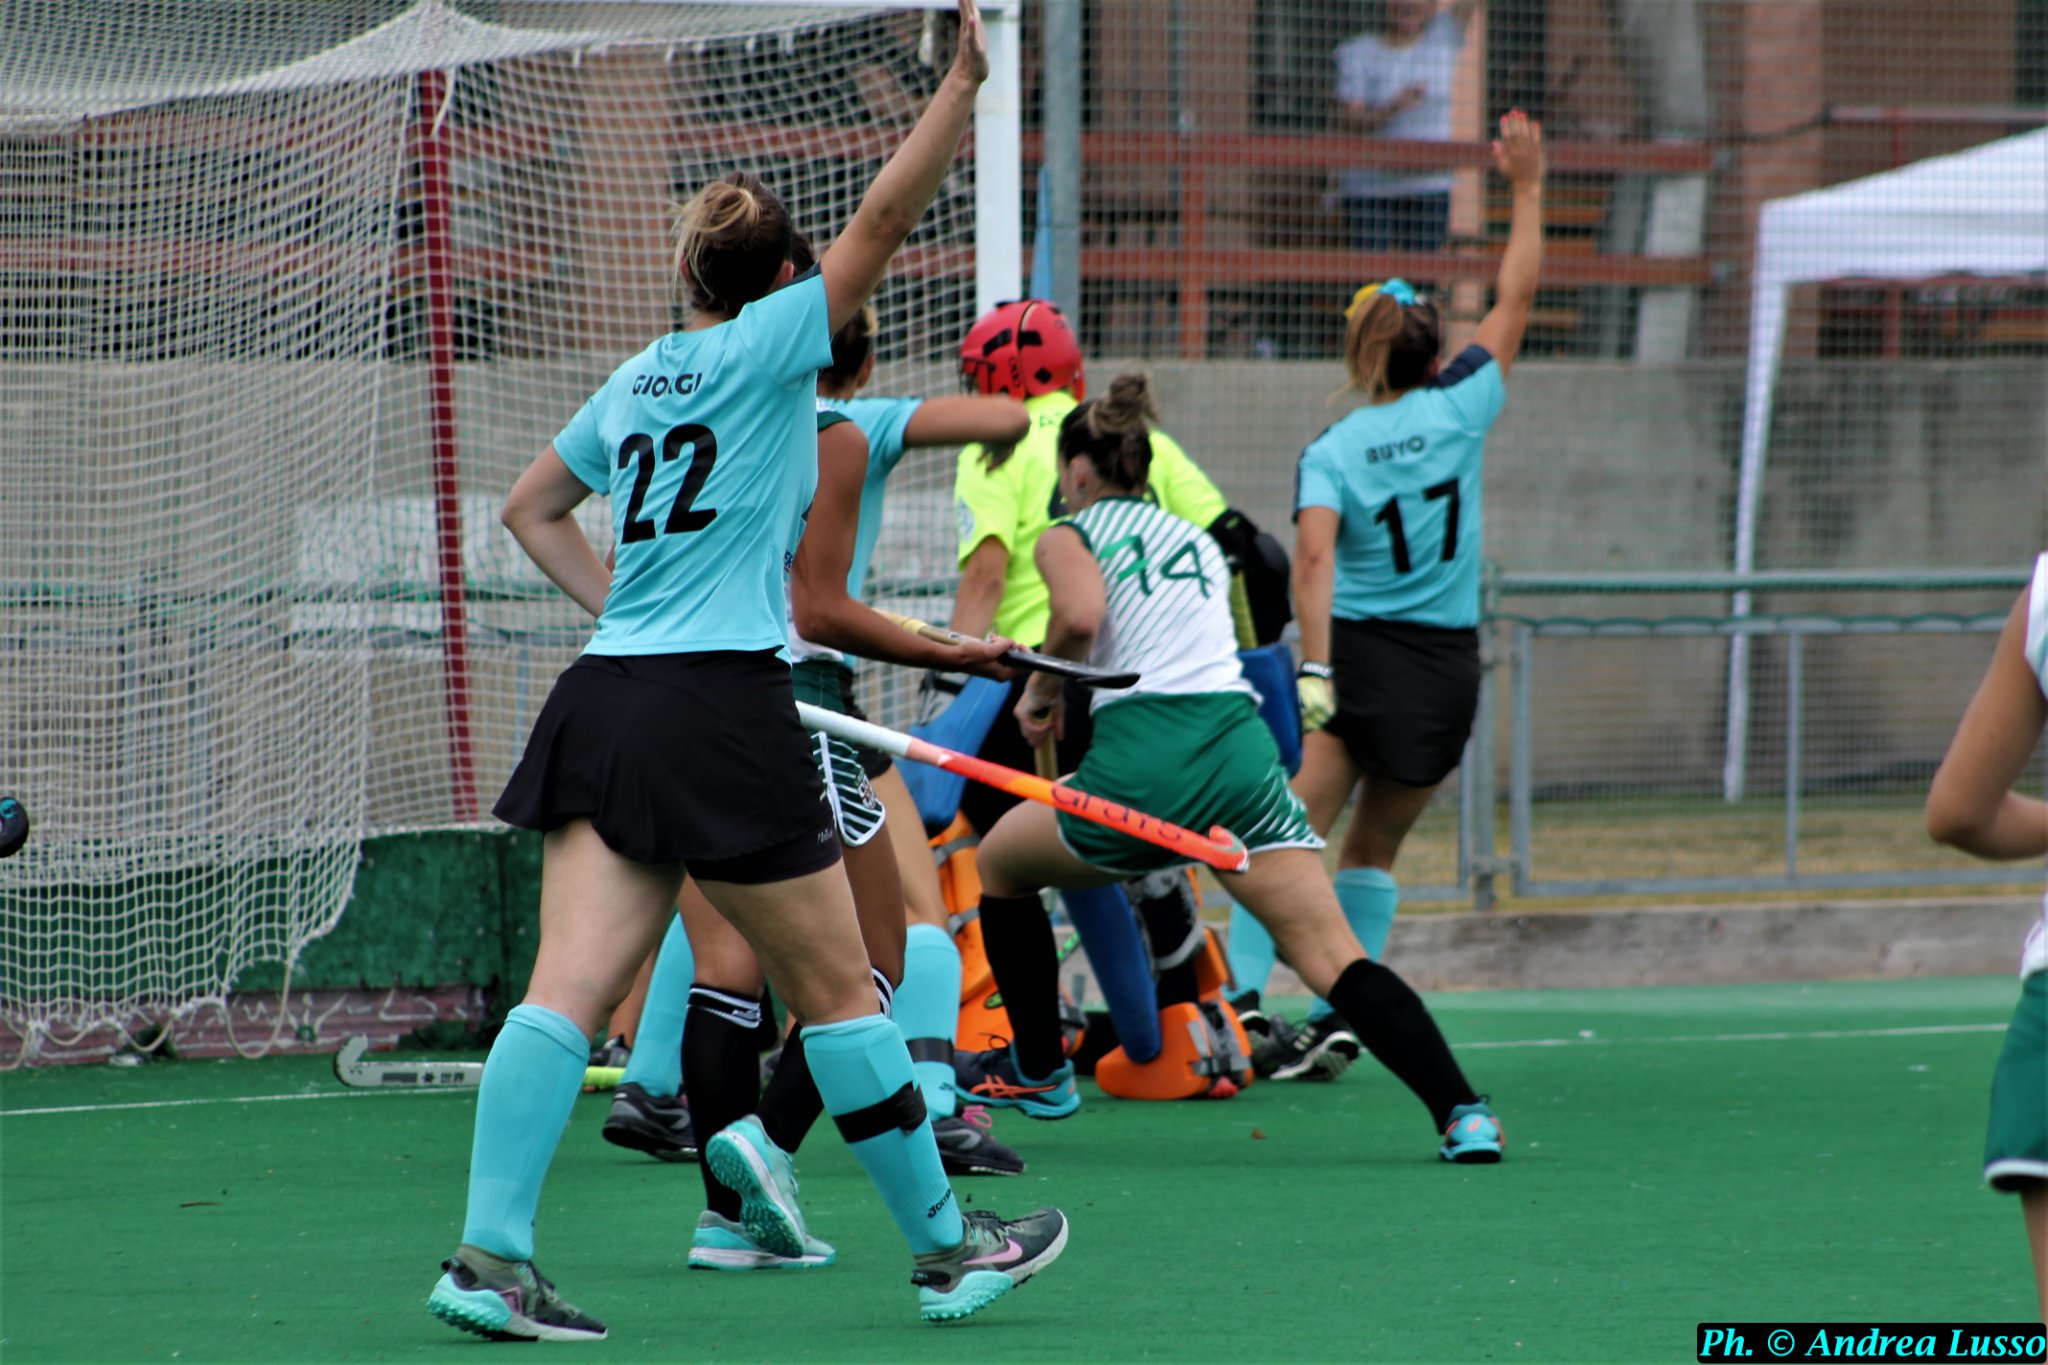 Italian Hockey Cup in Brazil: tomorrow morning HF Lorenzoni will play the cup with Argentina – www.ideawebtv.it